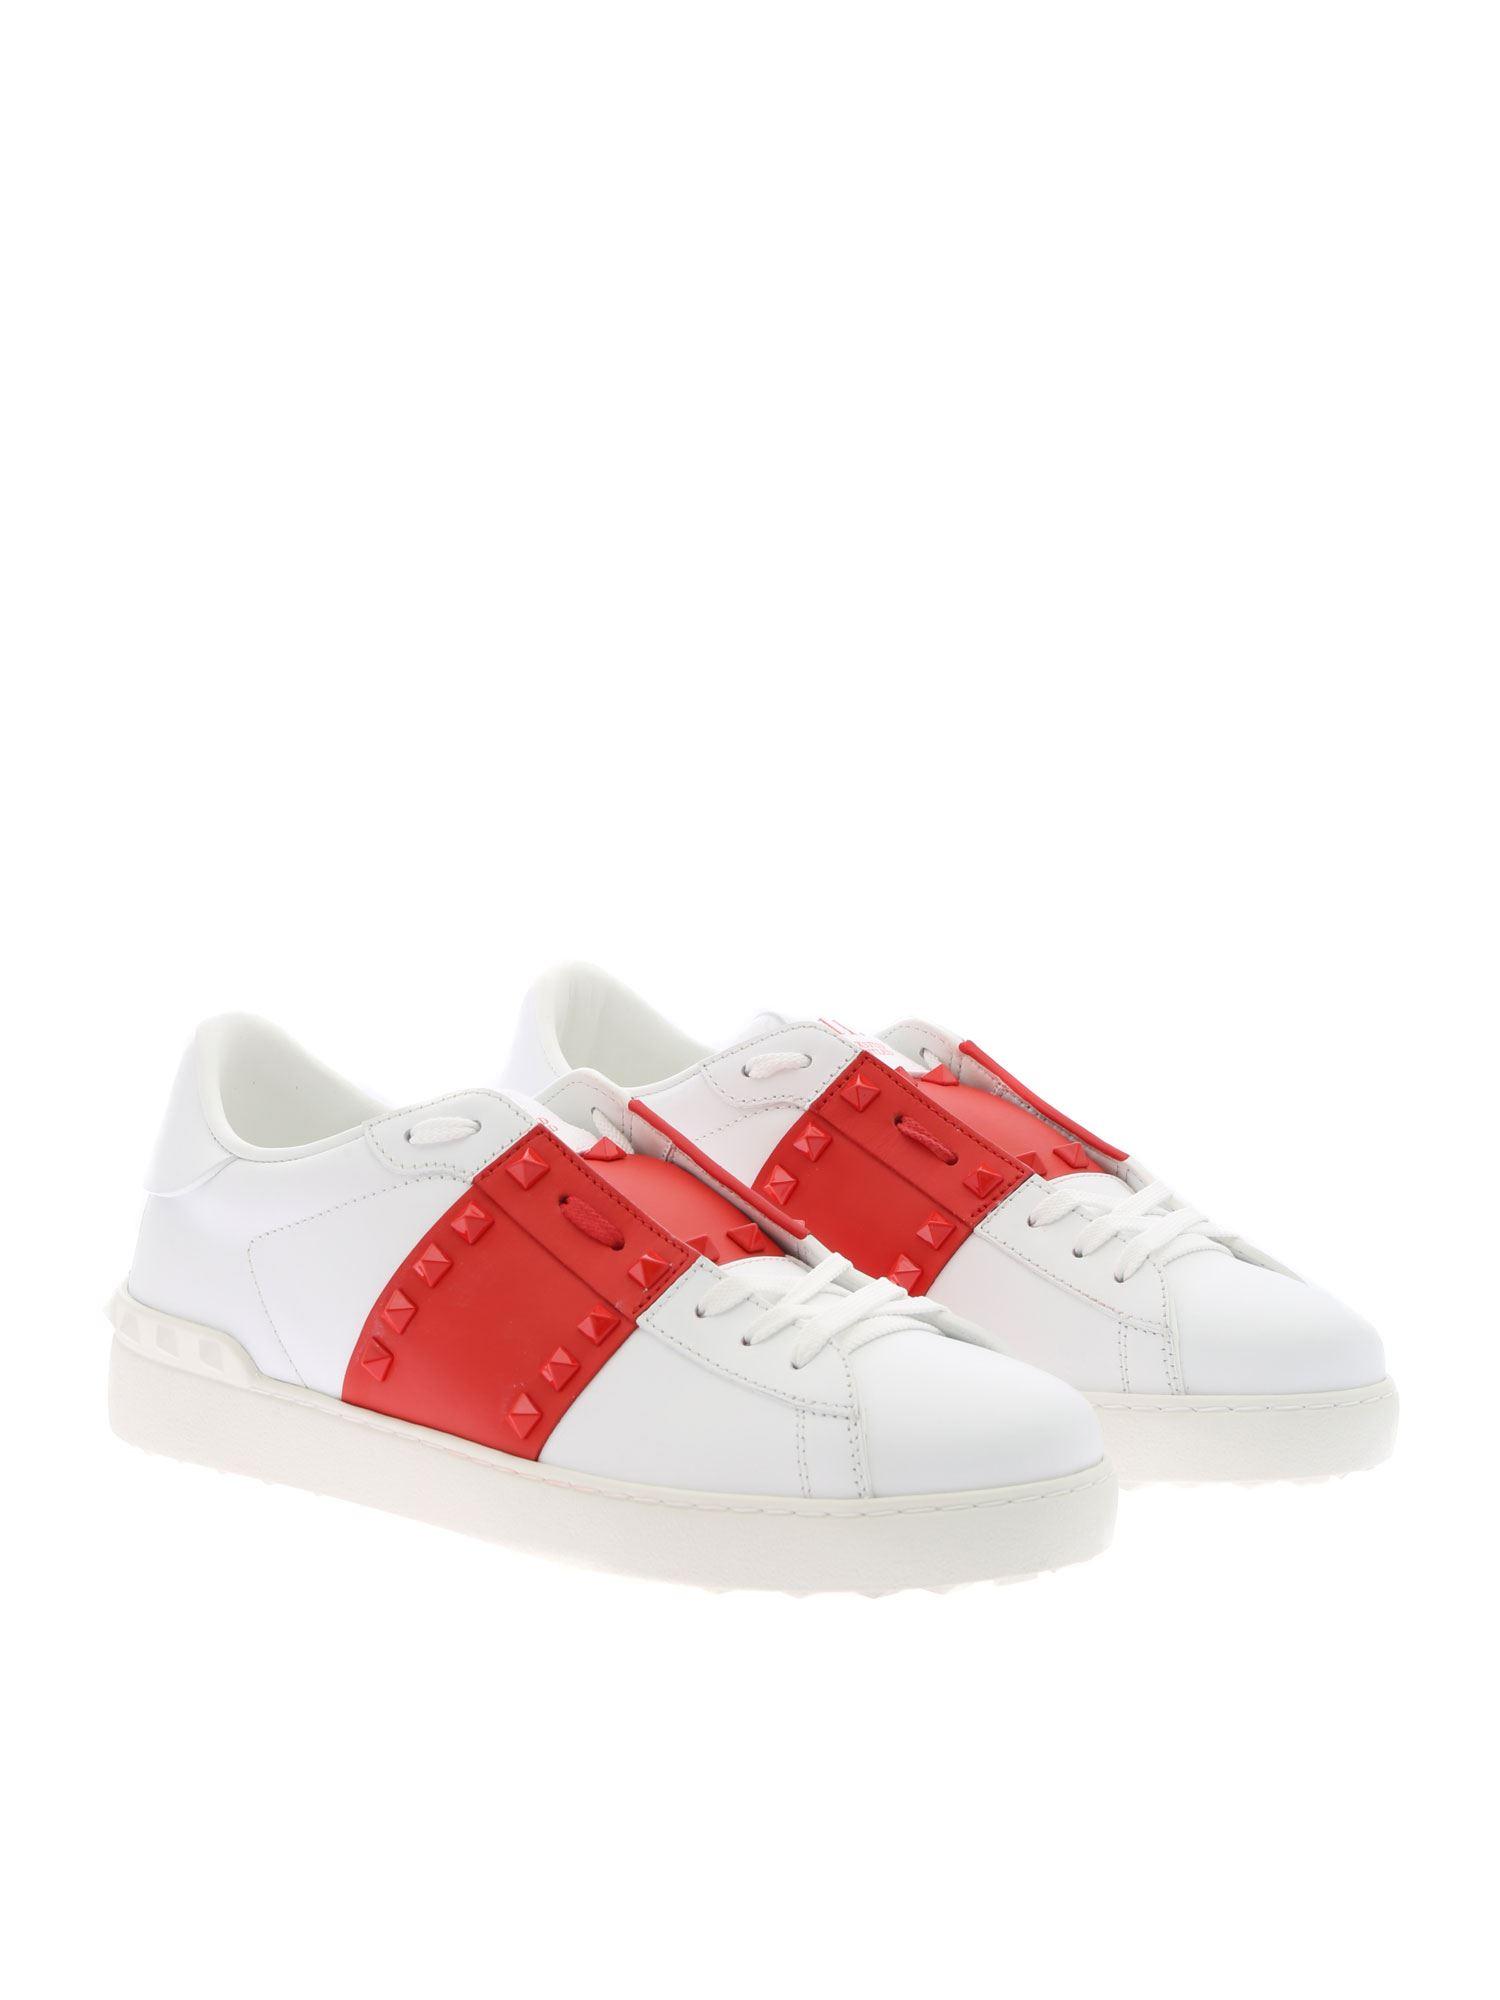 Valentino White And Red Sneakers Best Sale, SAVE 45% - motorhomevoyager.co. uk